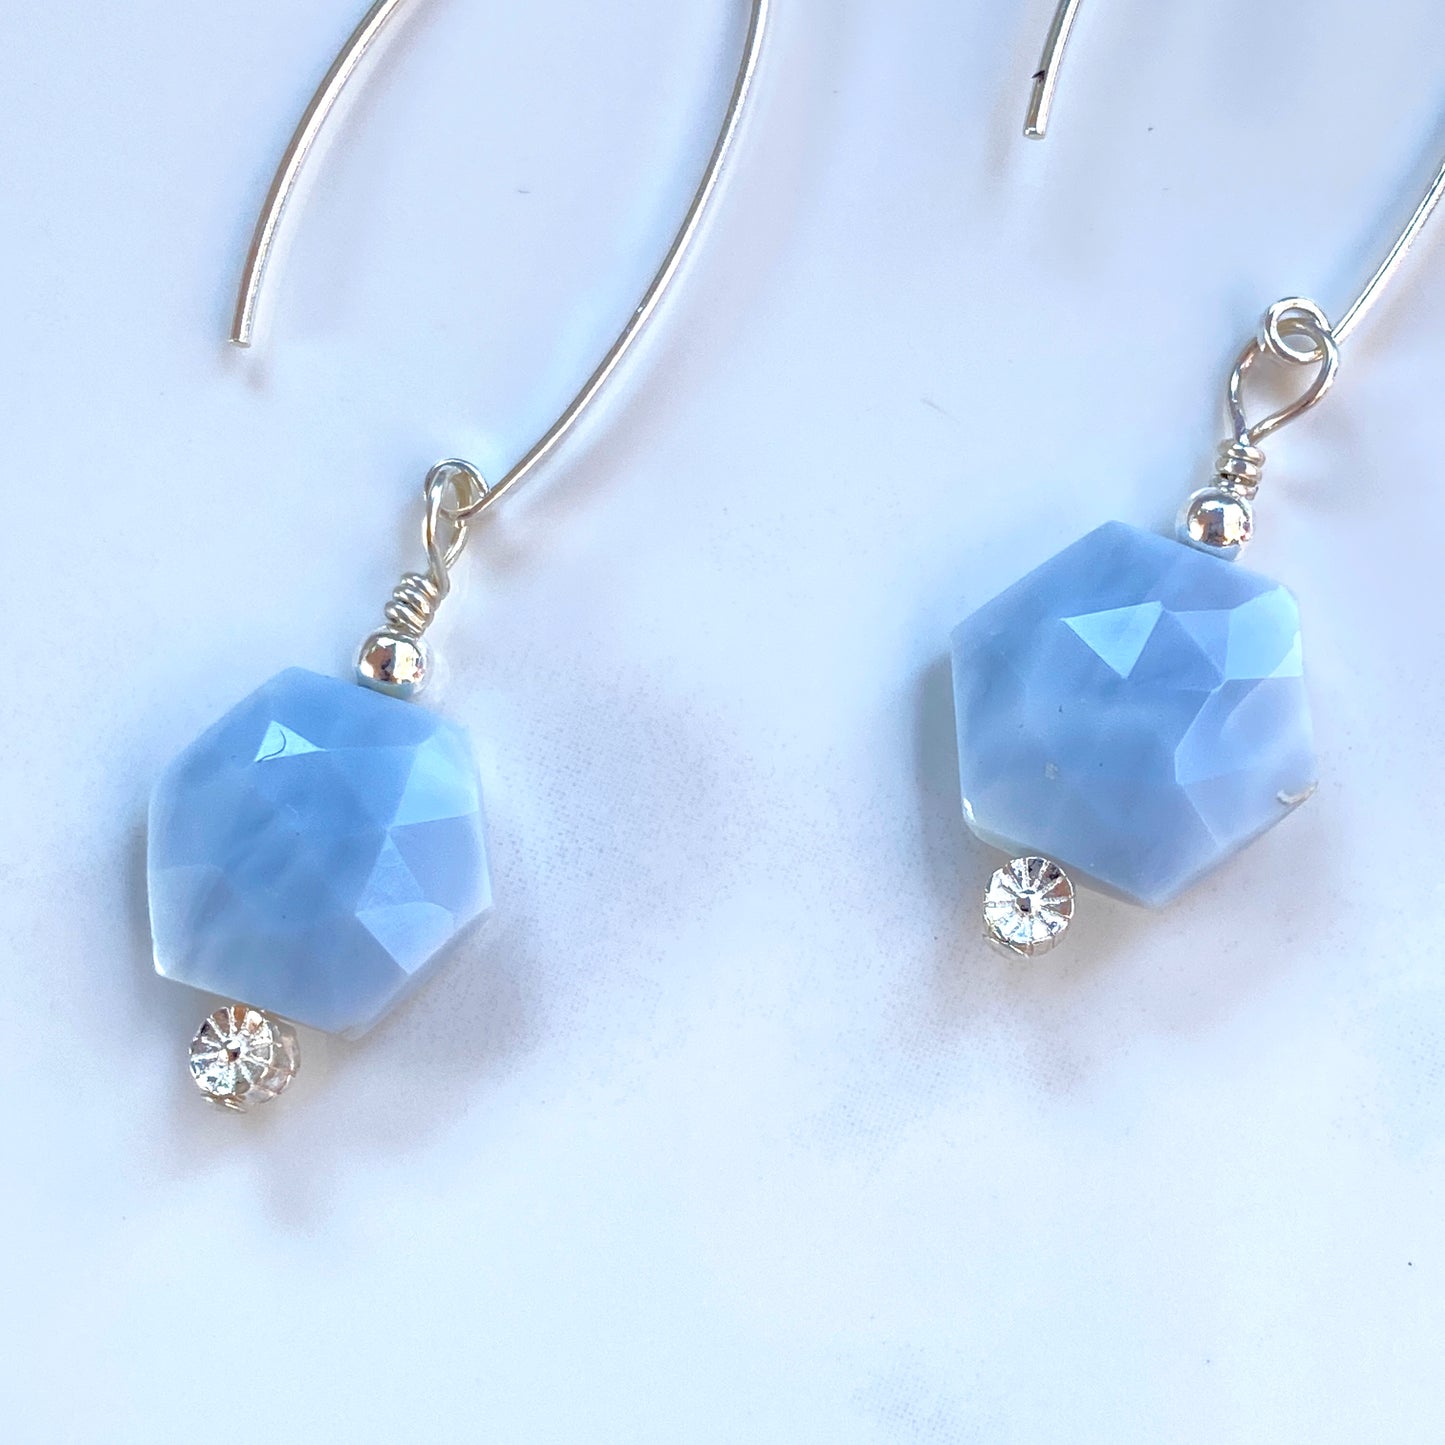 Blue Opal gemstone marquiee style Earrings with Sterling Silver